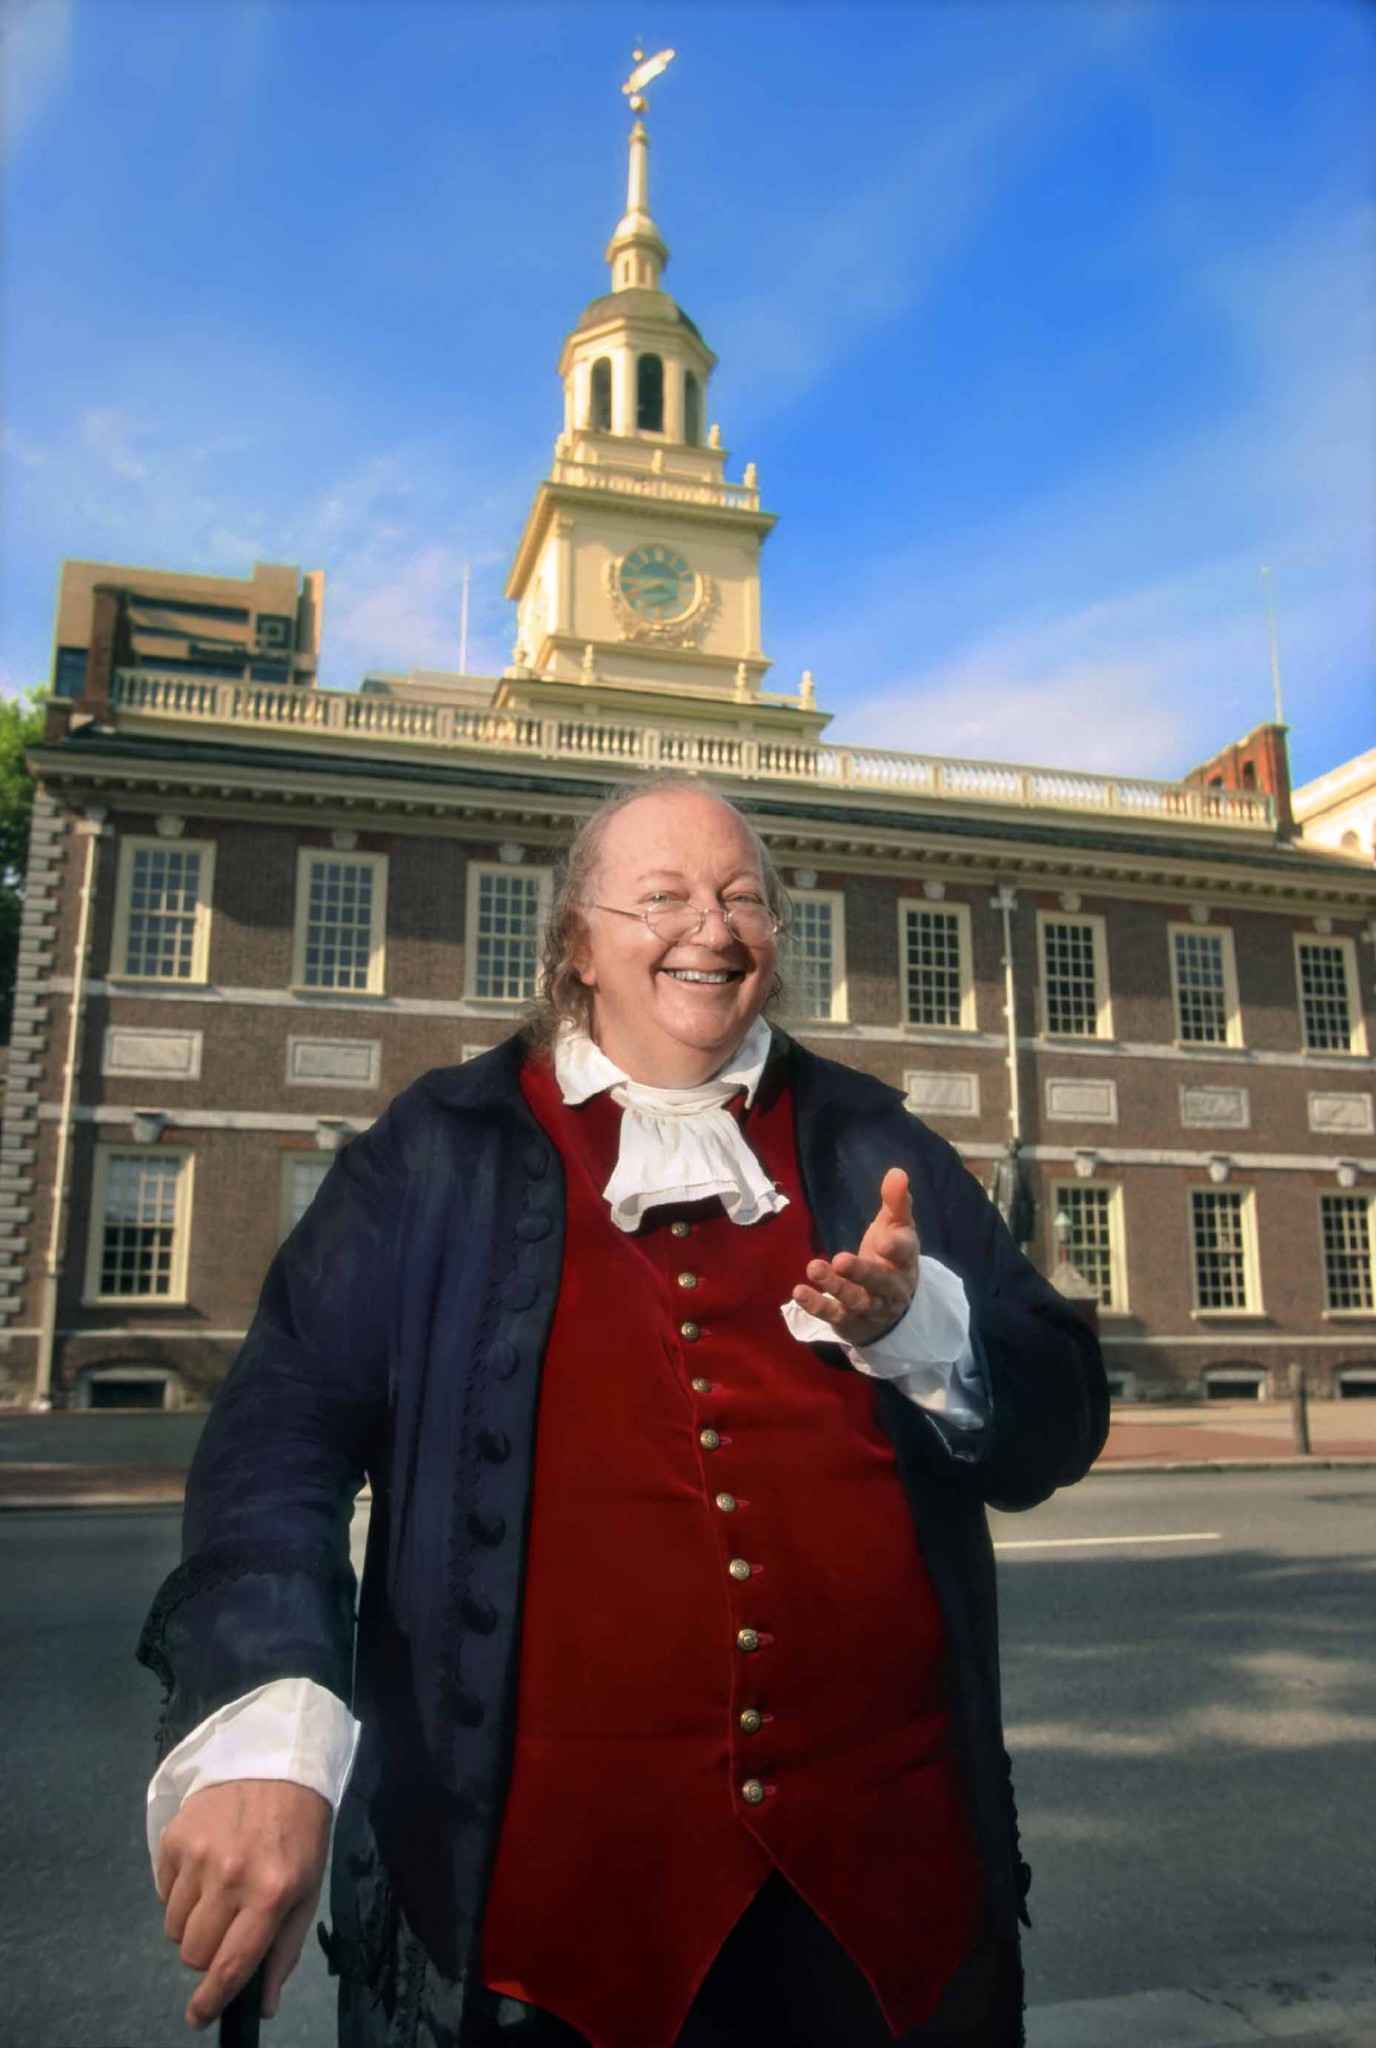 Benjamin Franklin’s Green Legacy for Philly